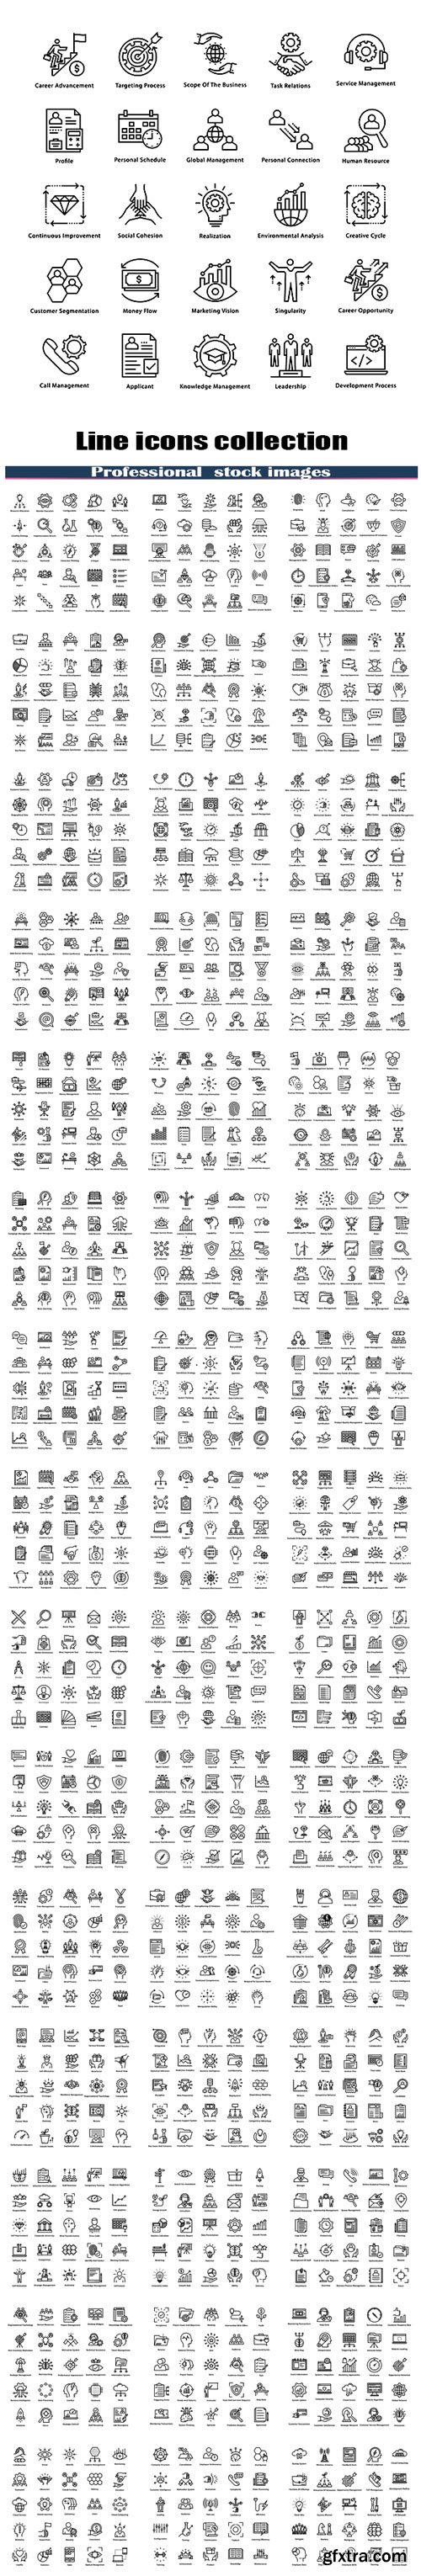 Line icons collection